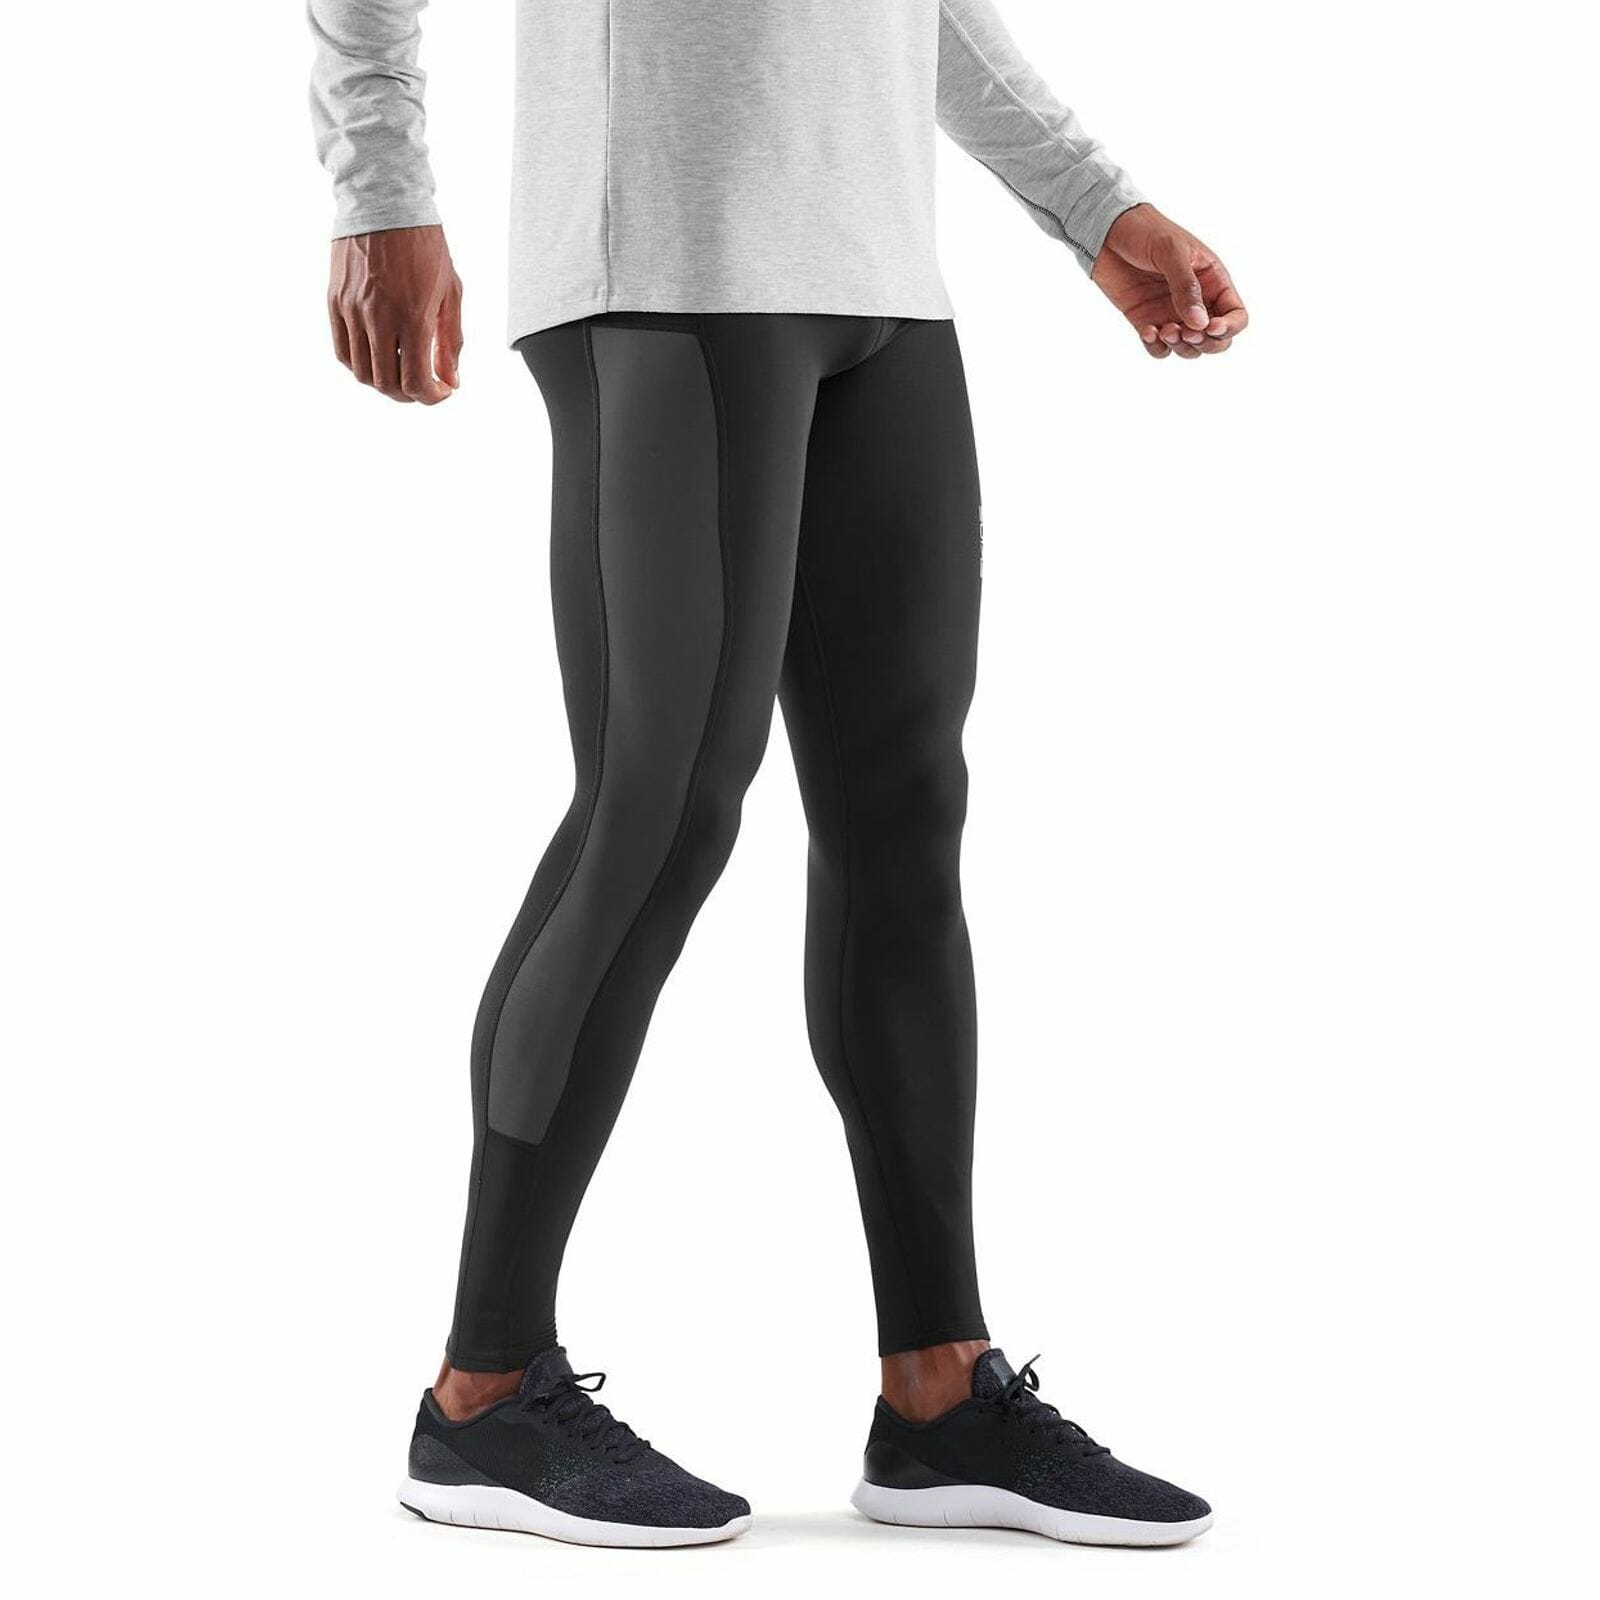  Thermajohn Mens Thermal Underwear Pants Long Johns Bottoms  Thermal Leggings For Men Extreme Cold